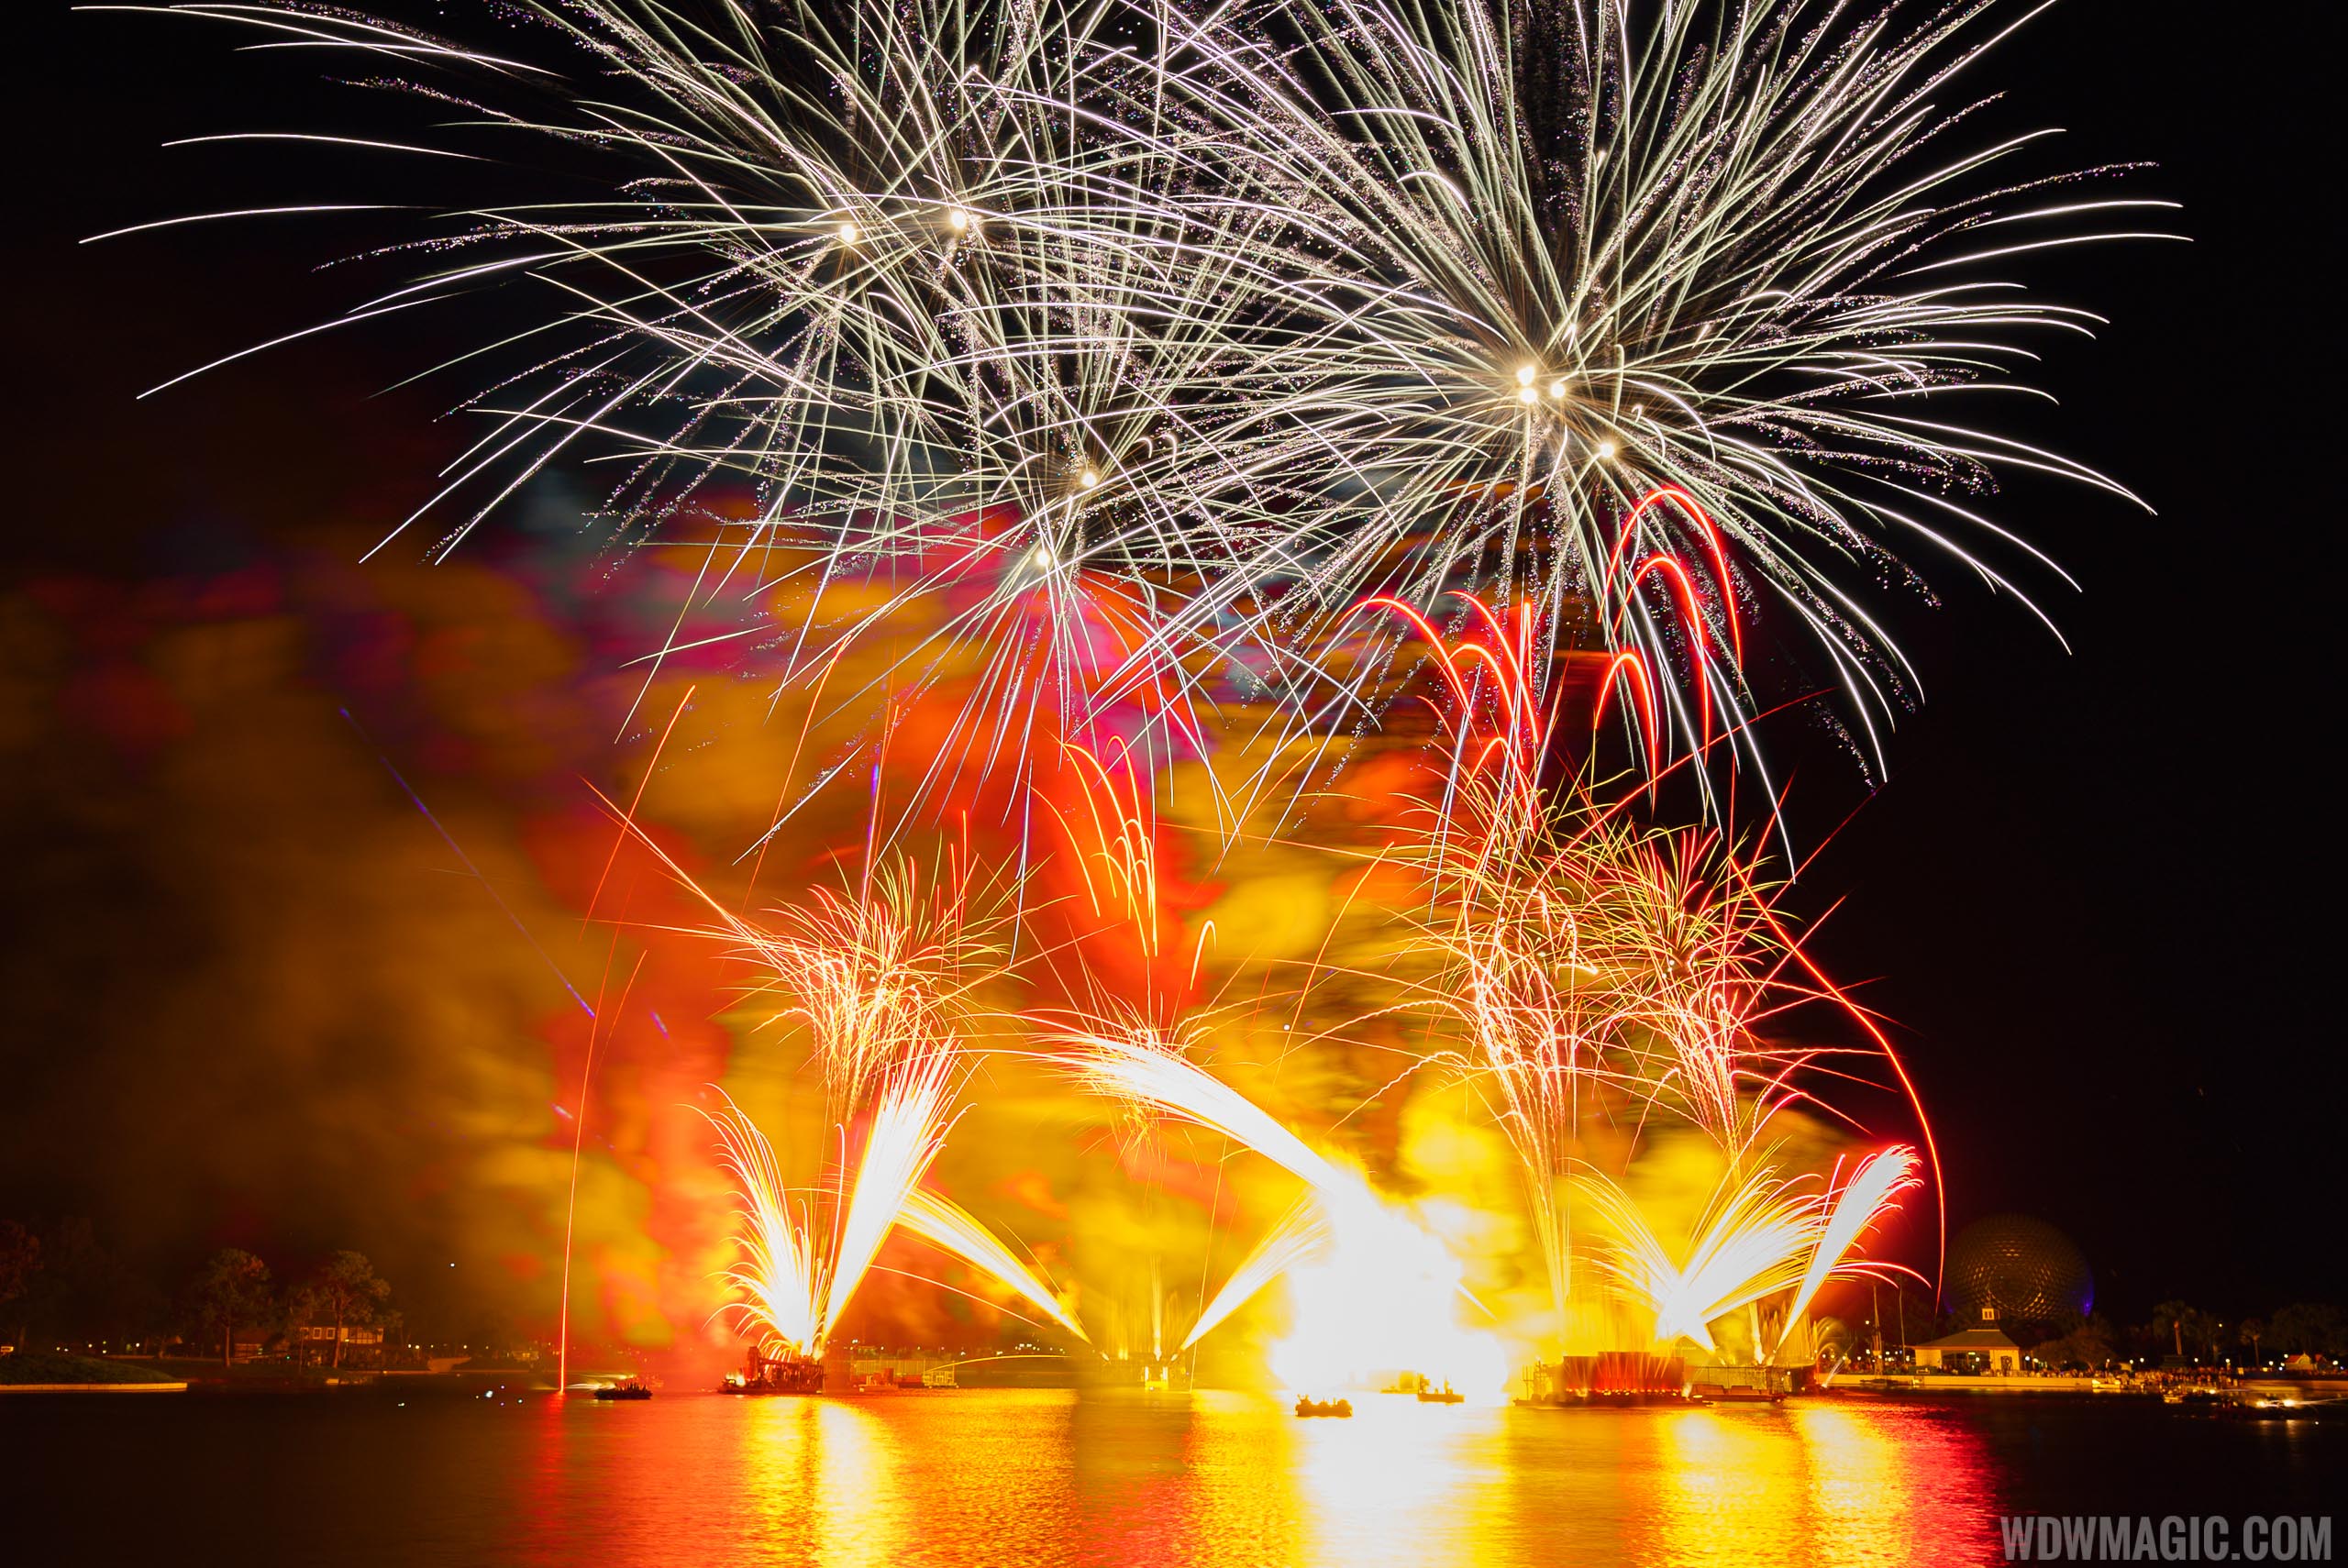 illuminations reflections of earth last show dinner package